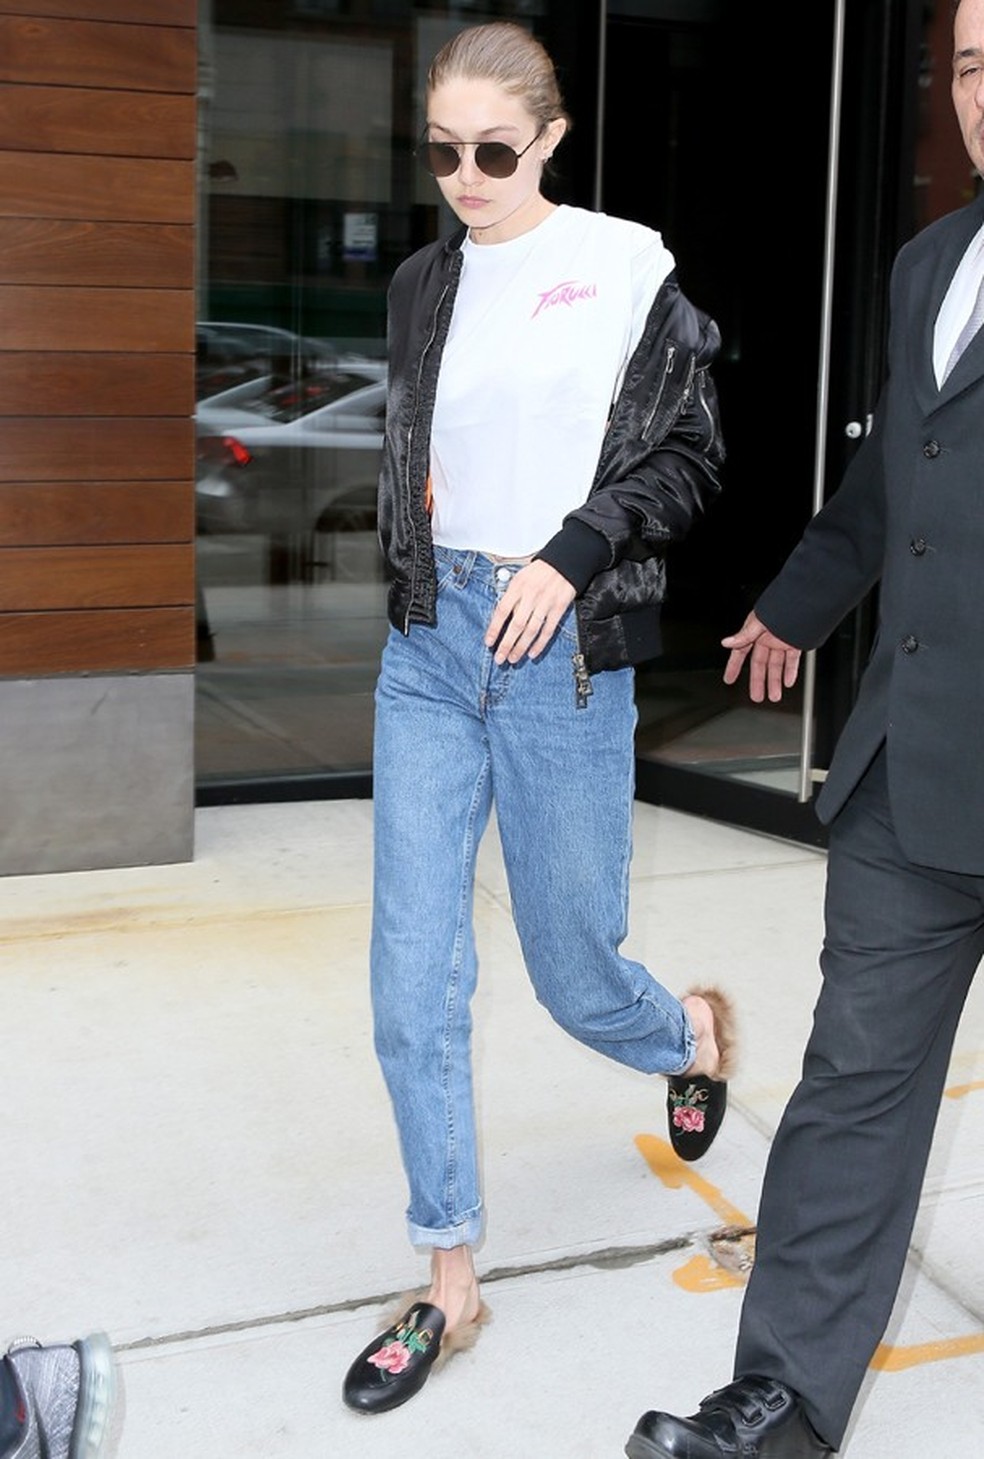 AK_824904 - New York, NY  - Gigi Hadid and her mom Yolanda head out into NYC for a day together. The blonde model is wearing mom jeans and a white tee paired with mules and colored lens shades.

Pictured: Gigi Hadid, Yolanda Hadid

AKM-GSI 21 ABRIL 20 (Foto: AKM-GSI) — Foto: Glamour